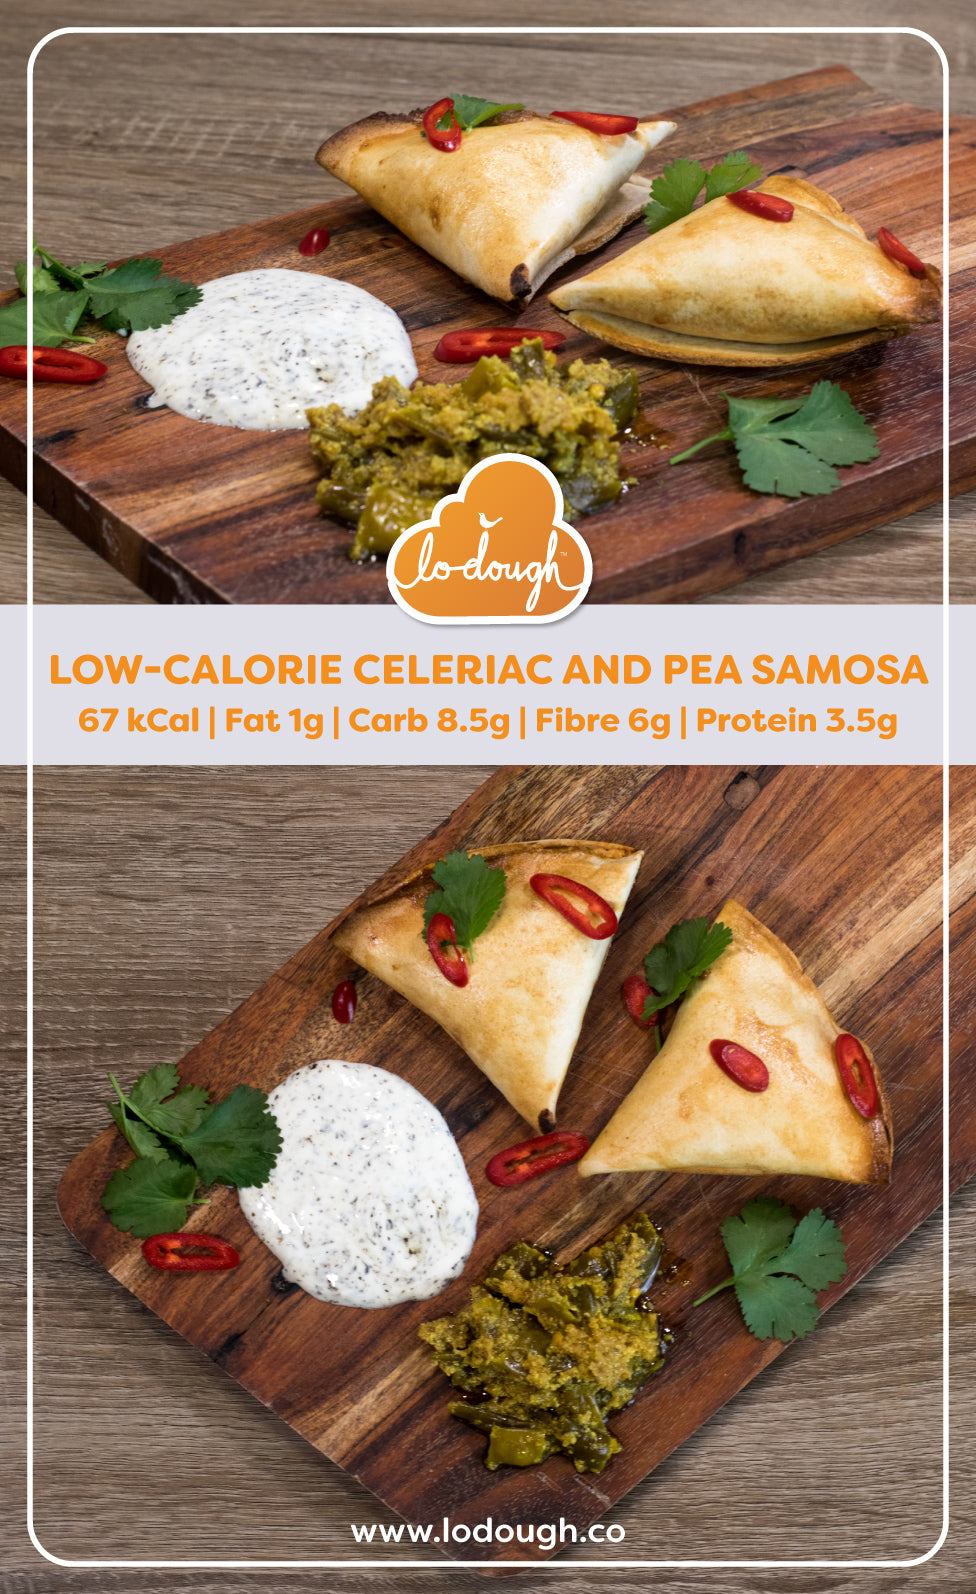 Low-Carb Celeriac and Pea Samosa | Low-Carb Pastry Alternatives ...